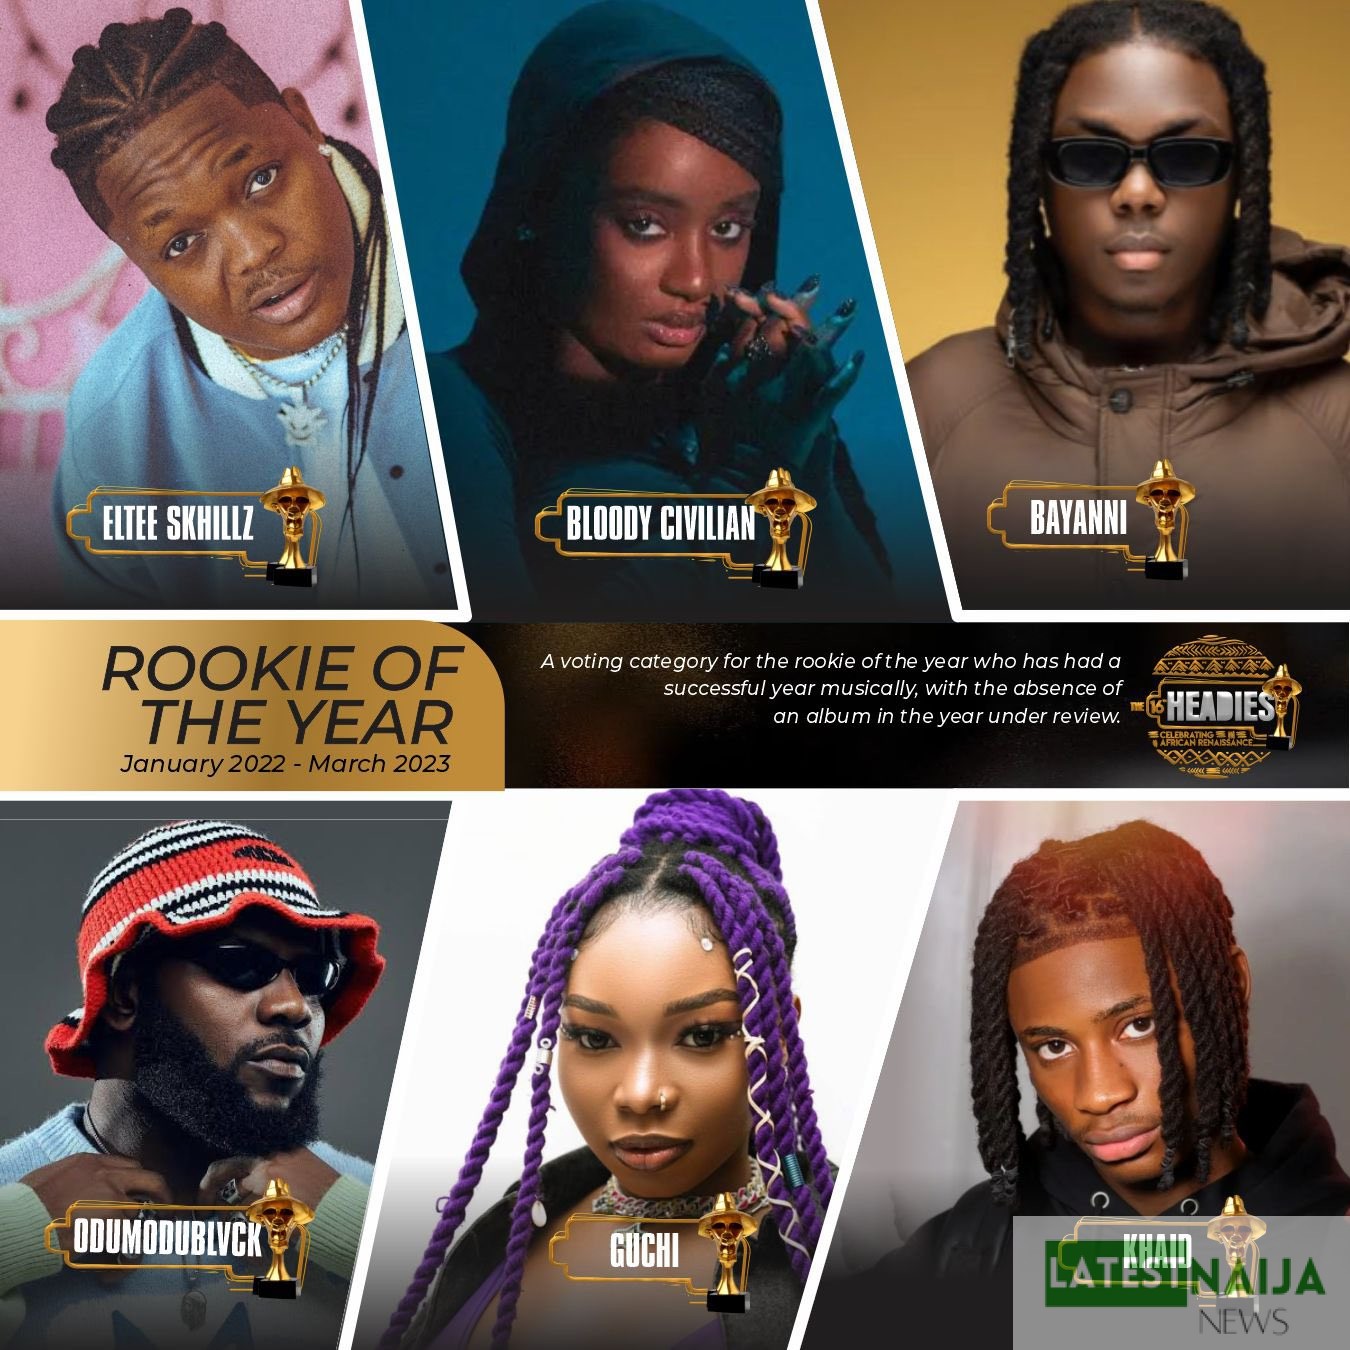 Headies Award: Bayanni, Odumodublvck Nominated For Rookie Of The Year [FULL LIST]  